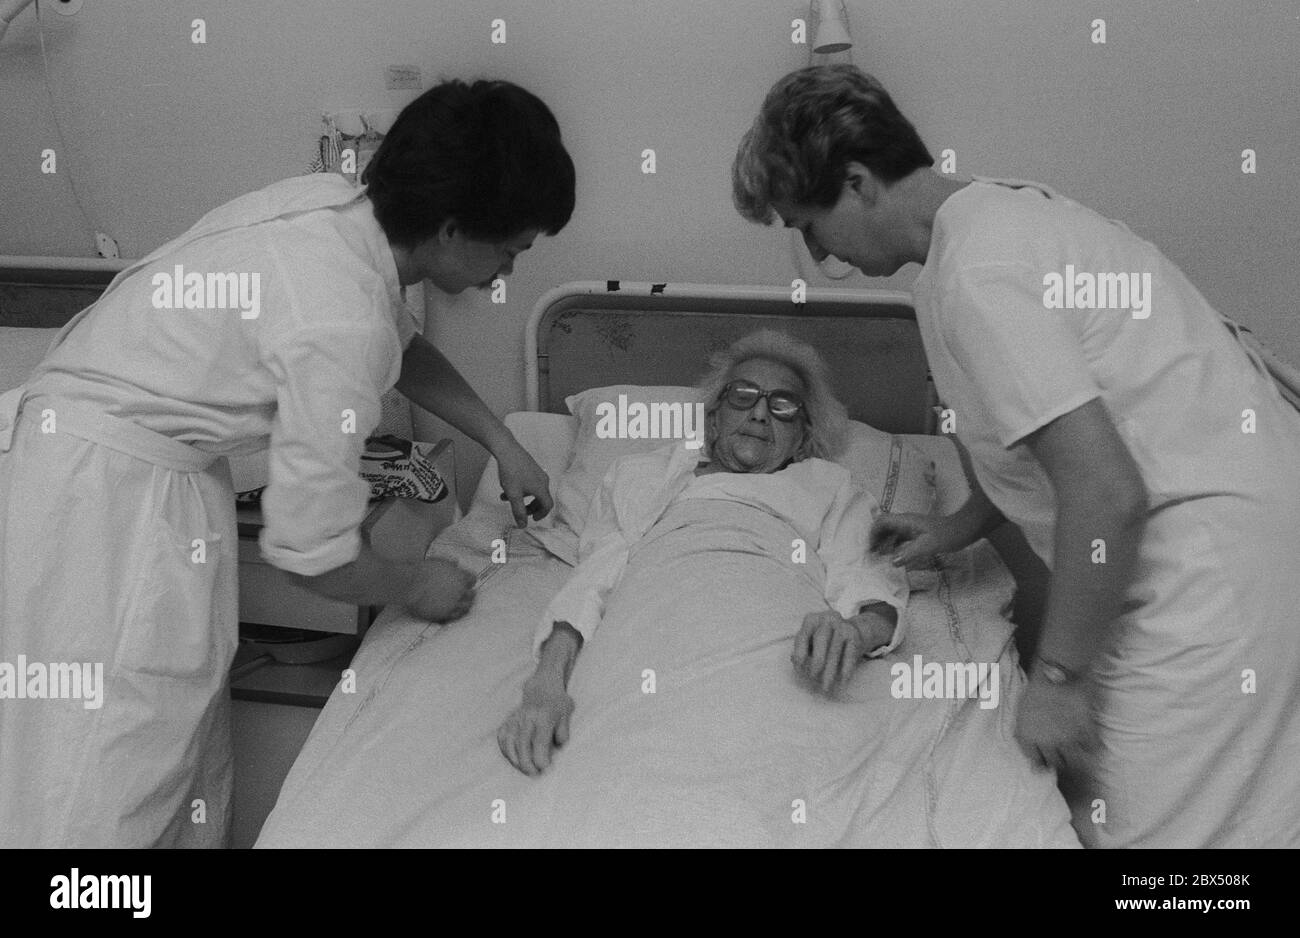 Berlin / Prenzlauer Berg / Health / GDR / 3 / 1990 Old woman in Prenzlauer Berg hospital, ward for chronically ill patients. There are 8 beds in the room. Nurses. // Seniors / Care / Old People / *** Local Caption *** East Germany / Communist Germany / Health Hospital in Prenzlauer Berg, Quarter of East Berlin. [automated translation] Stock Photo